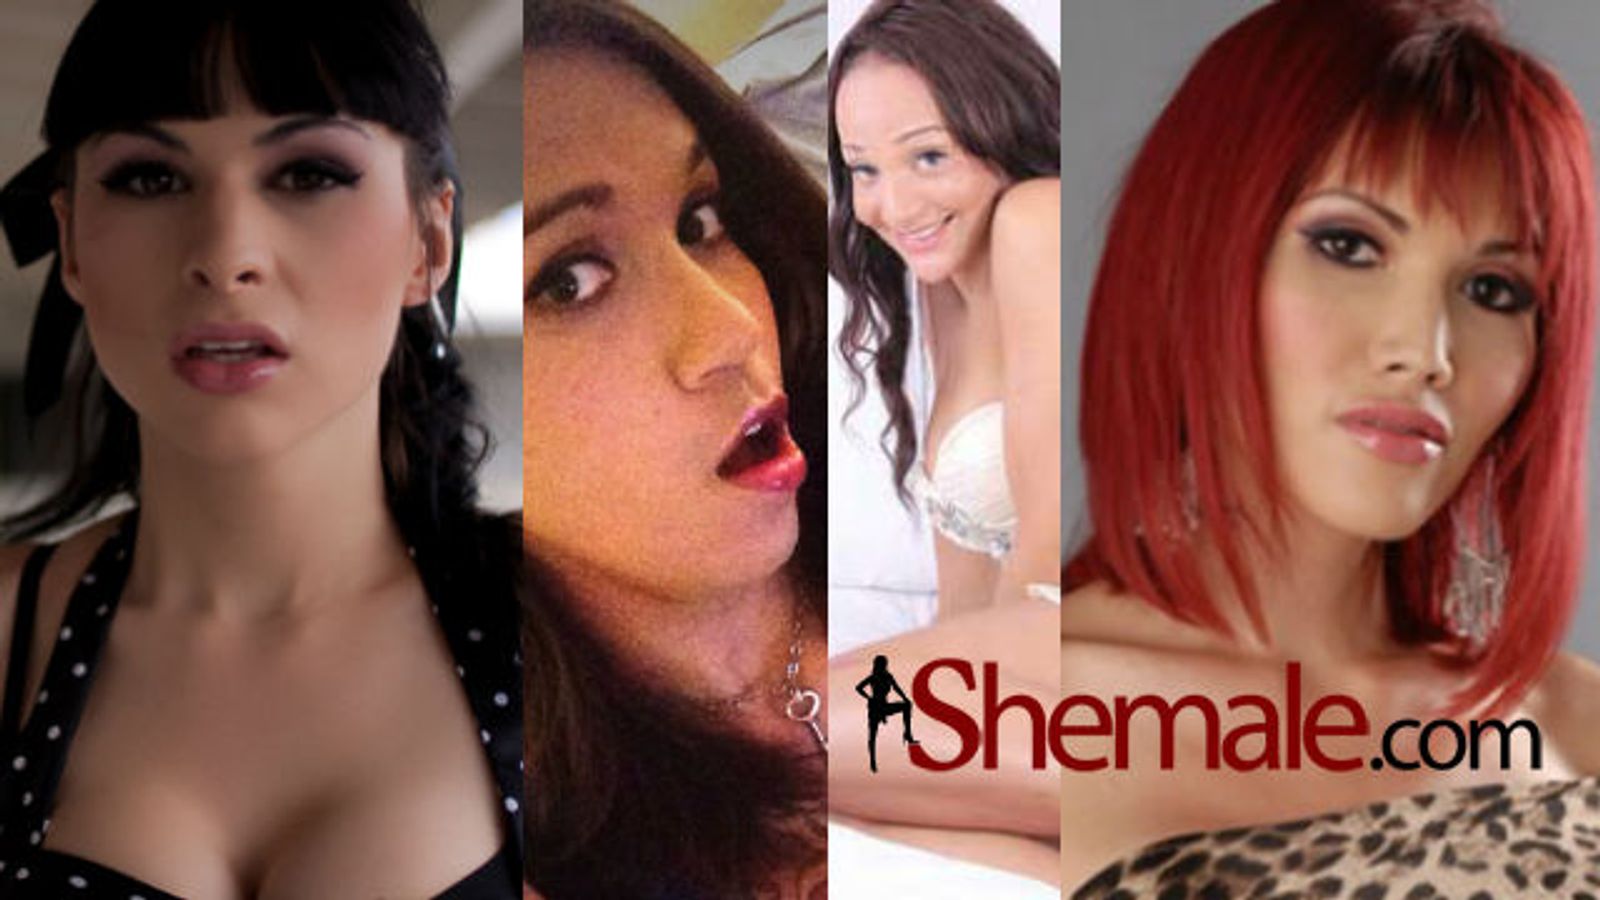 Shemale.com Adds Four of the Hottest Transgender Porn Stars